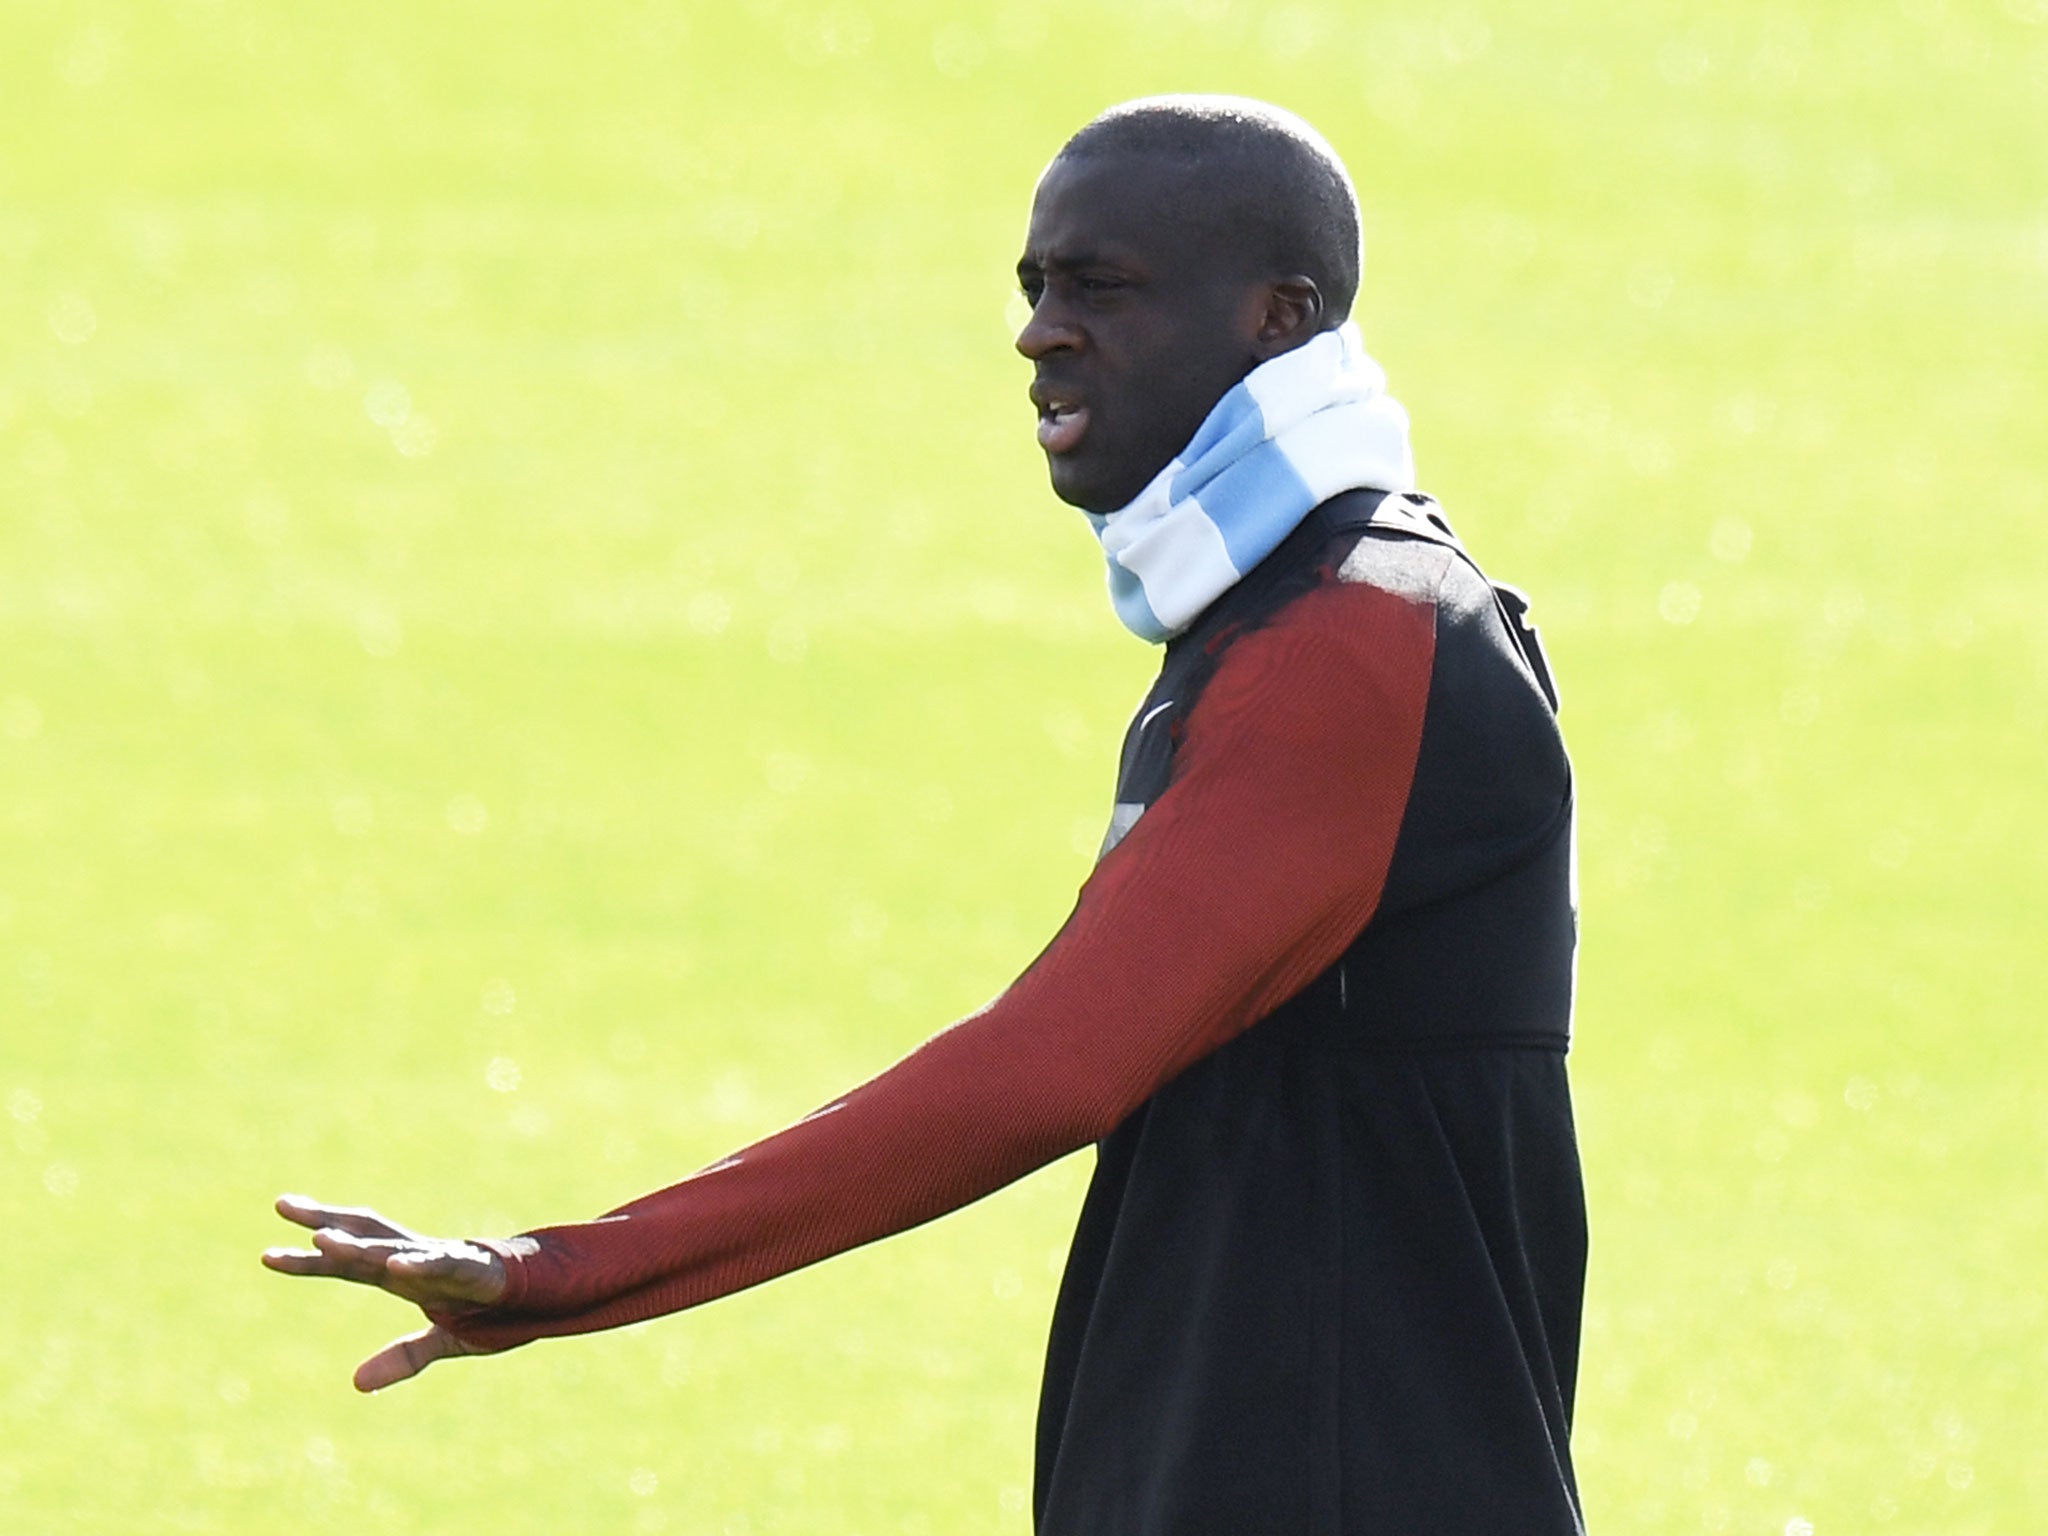 Seluk's latest comments continue to keep Toure trapped in the long-standing feud